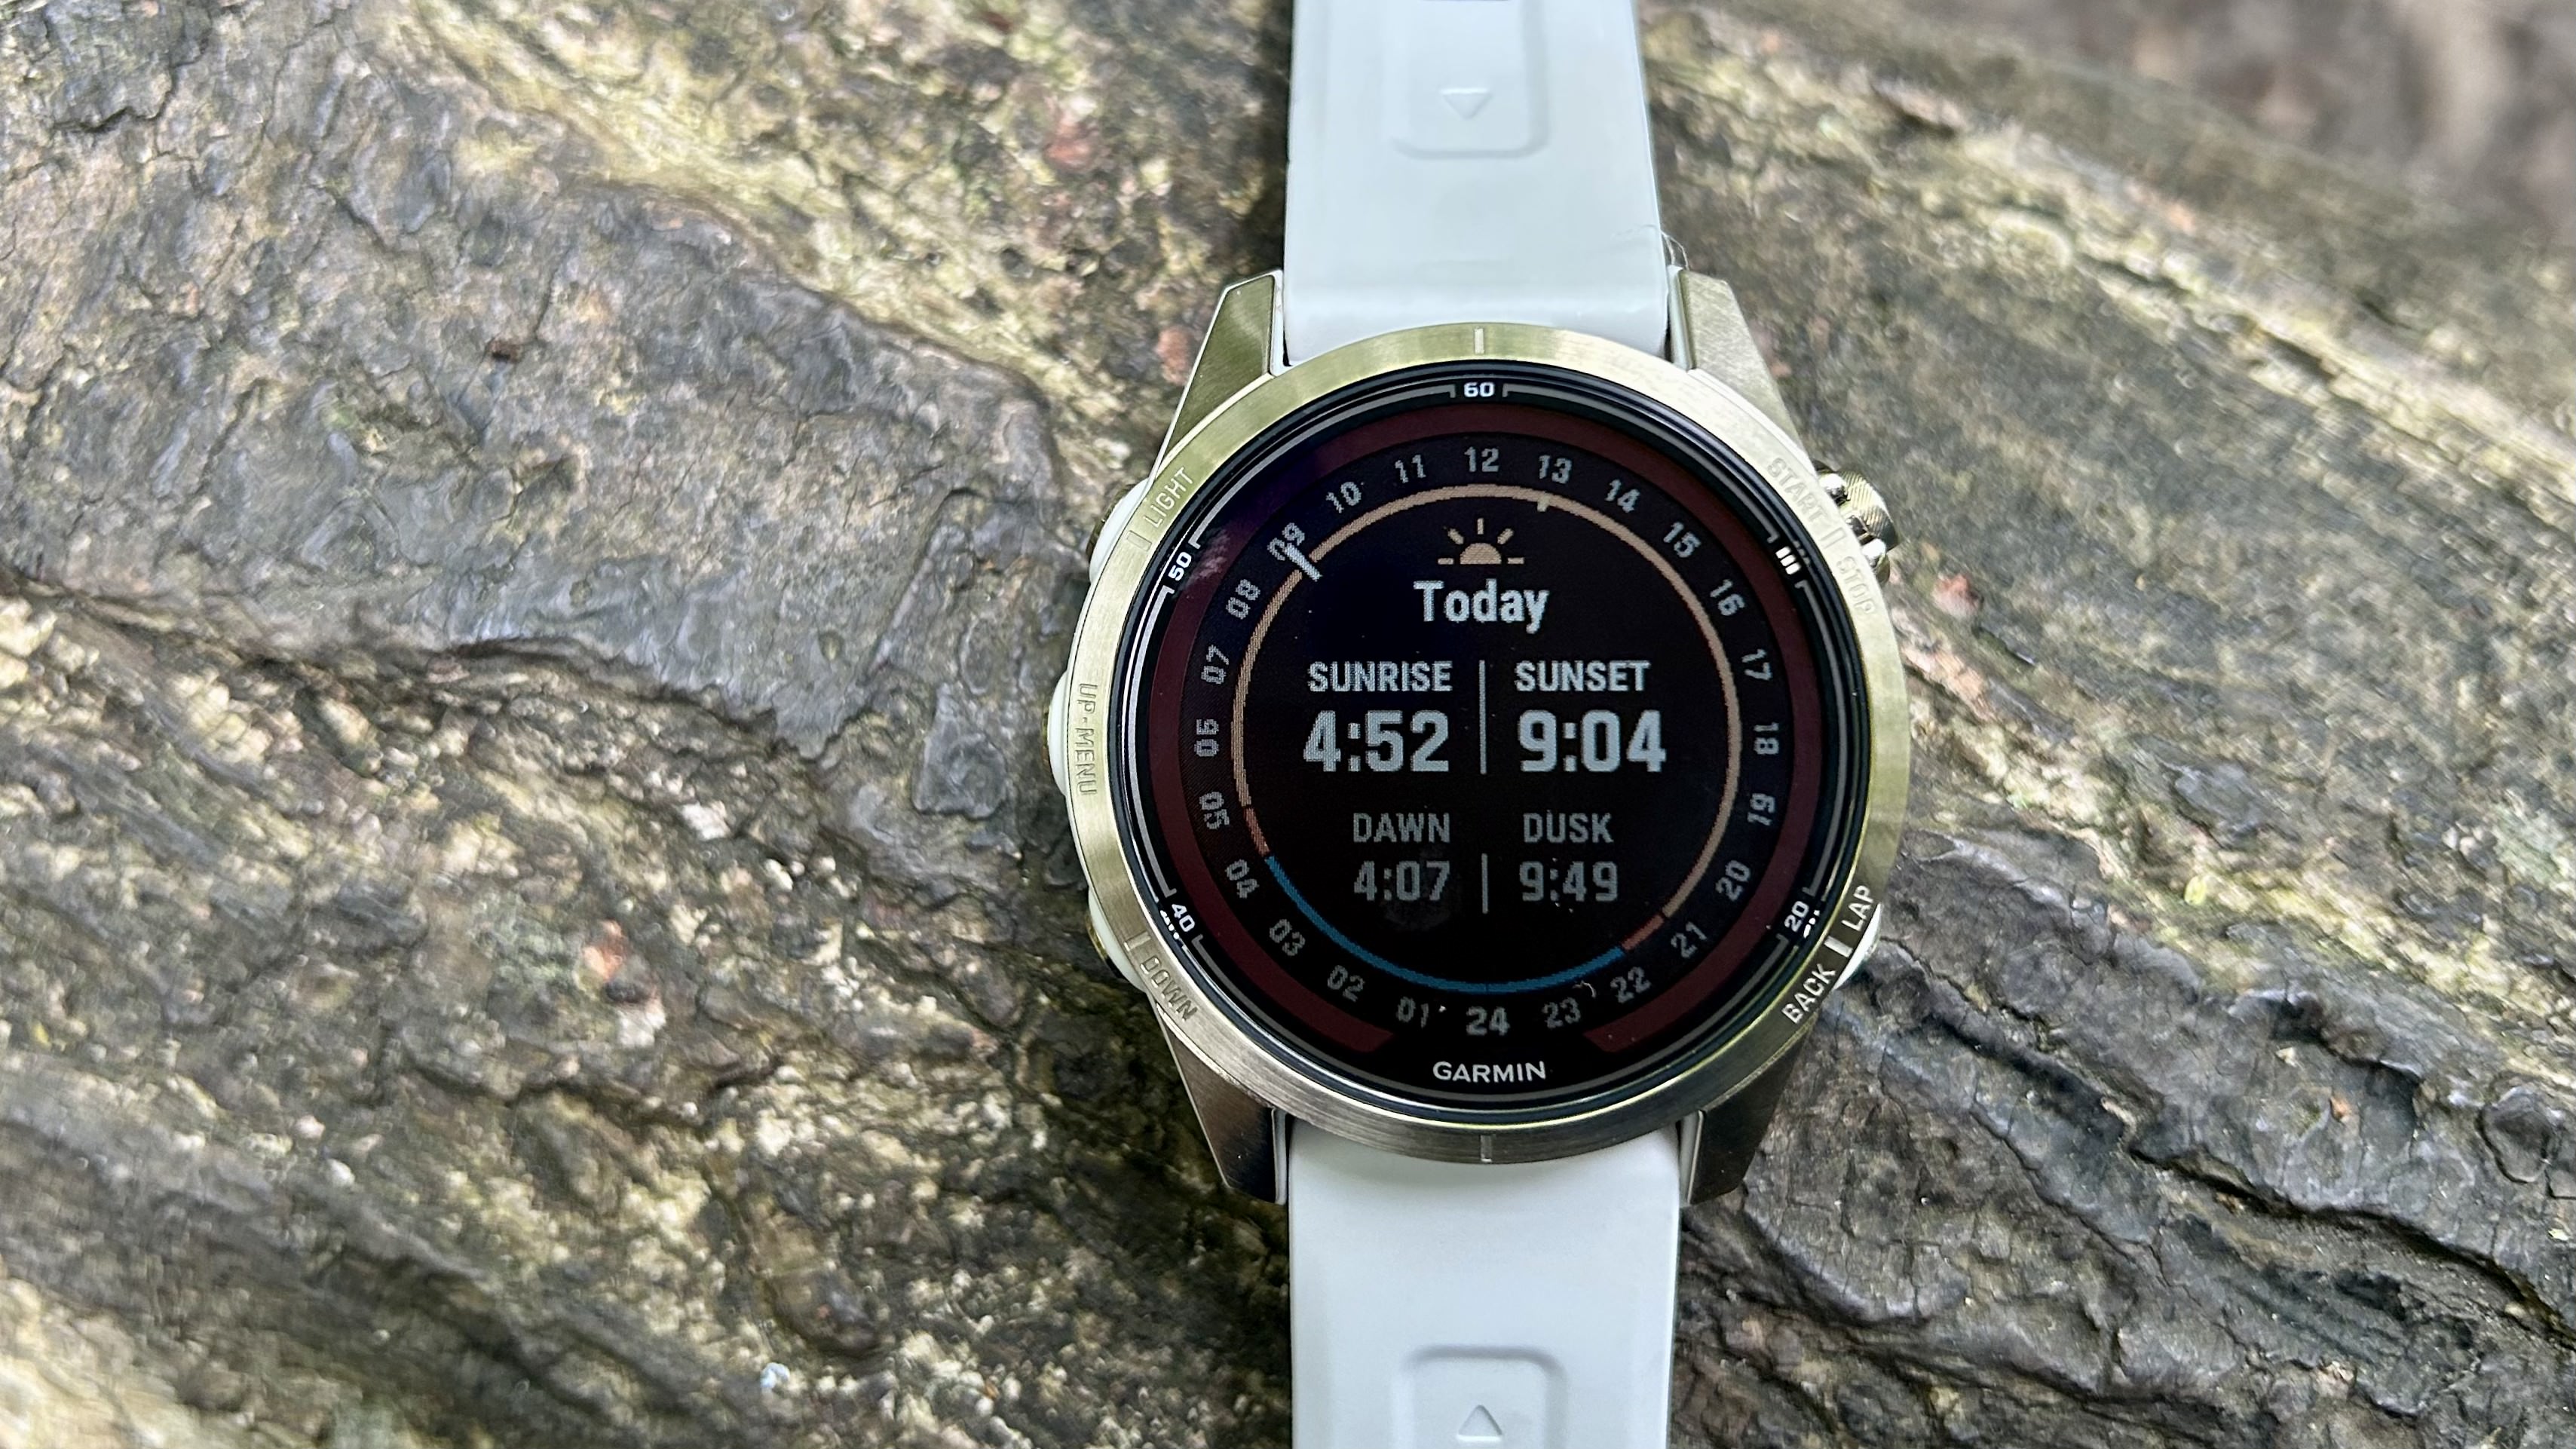 Garmin Fenix 7x Review  Who is this Watch for? 